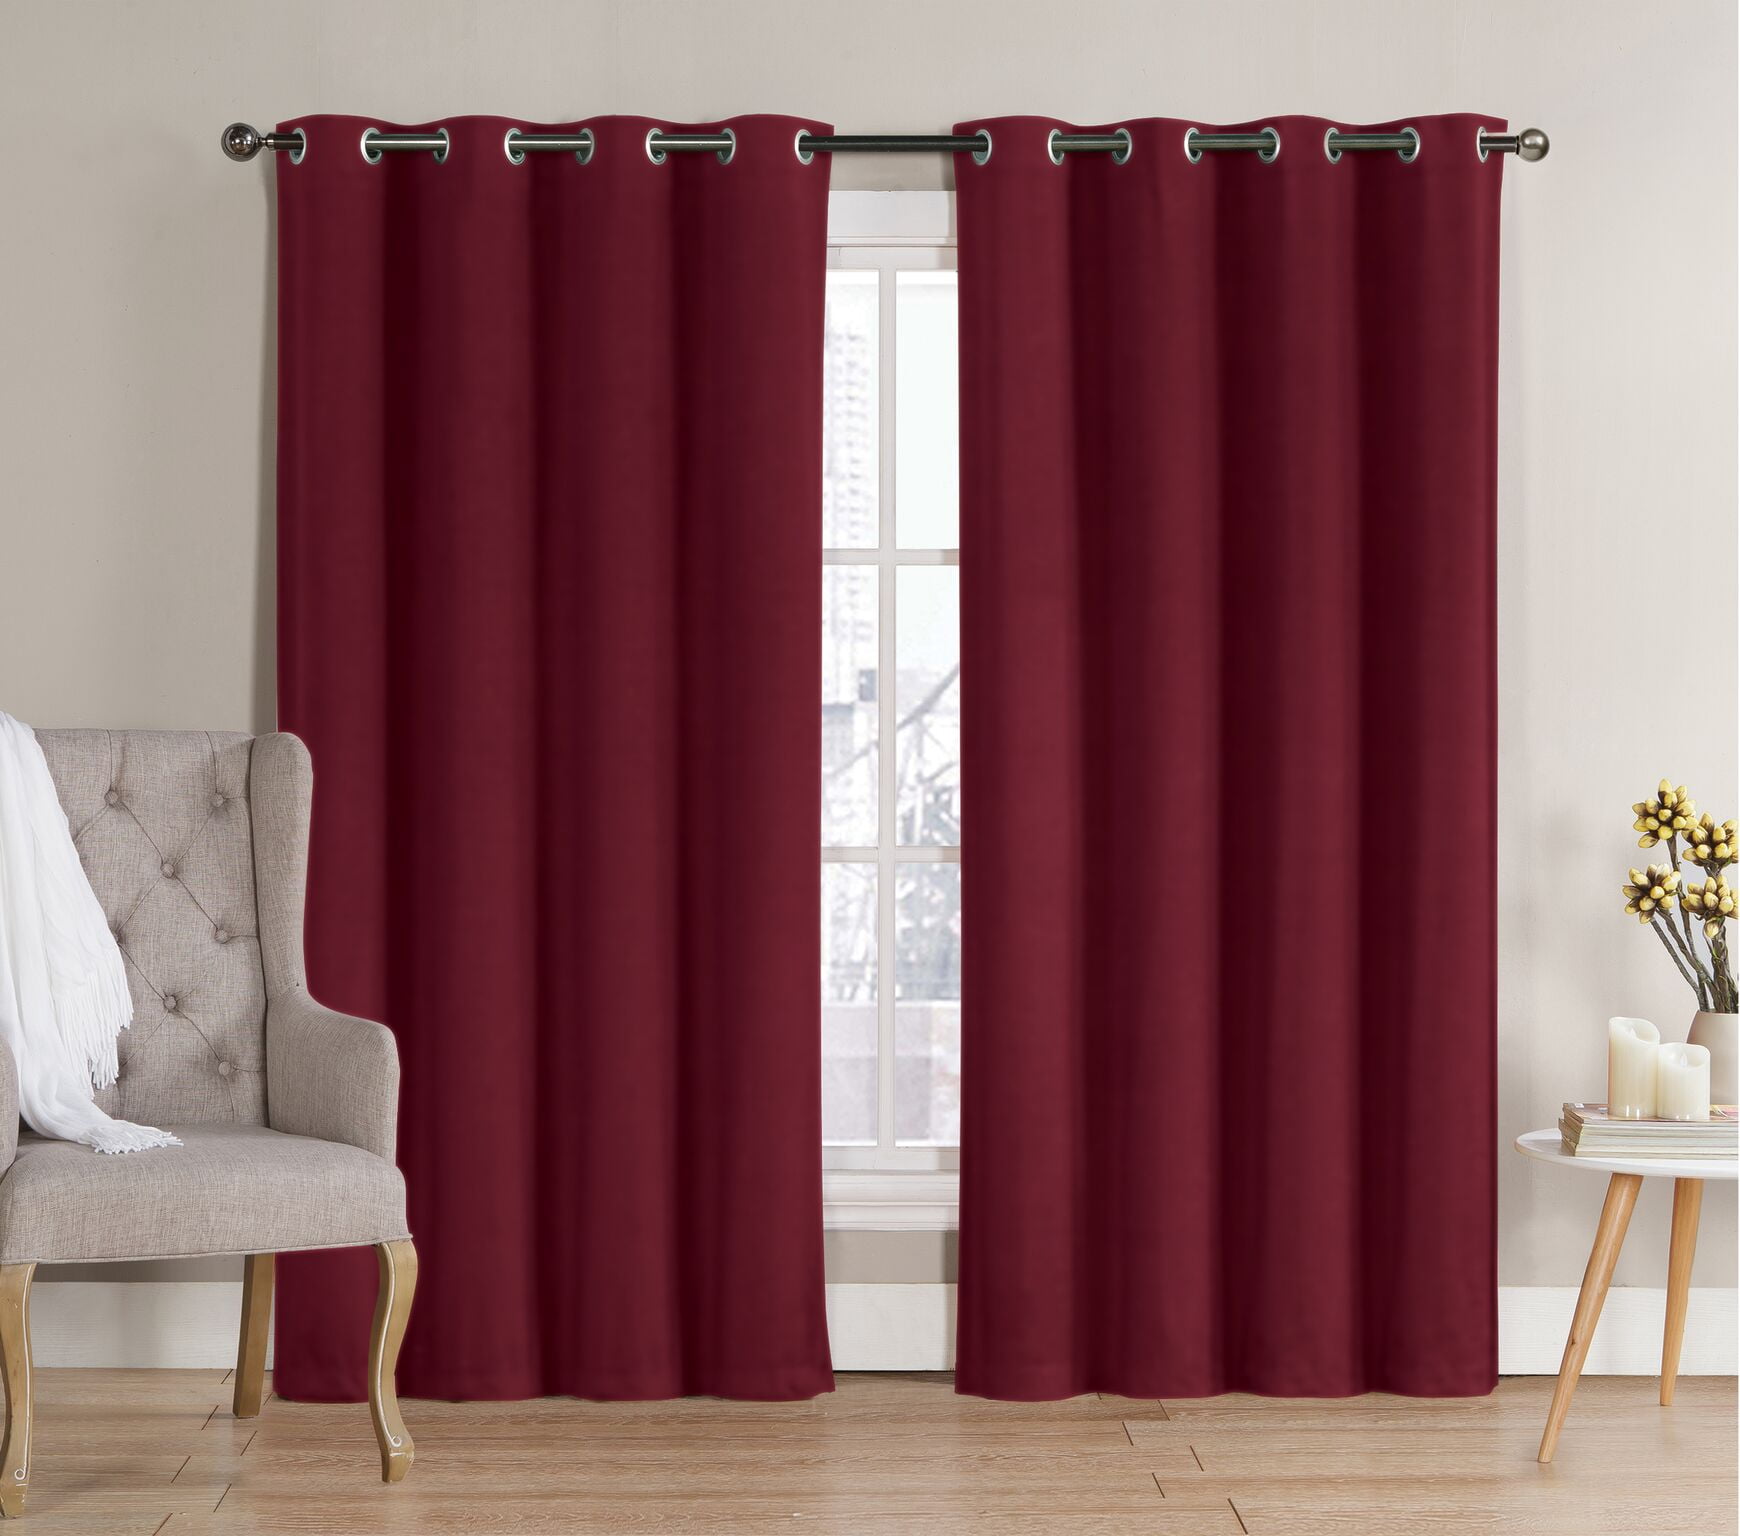 2 BURGUNDY PANEL 100% BLACKOUT HEAVY THICK GROMMET WINDOW CURTAIN LINED K34 84" 